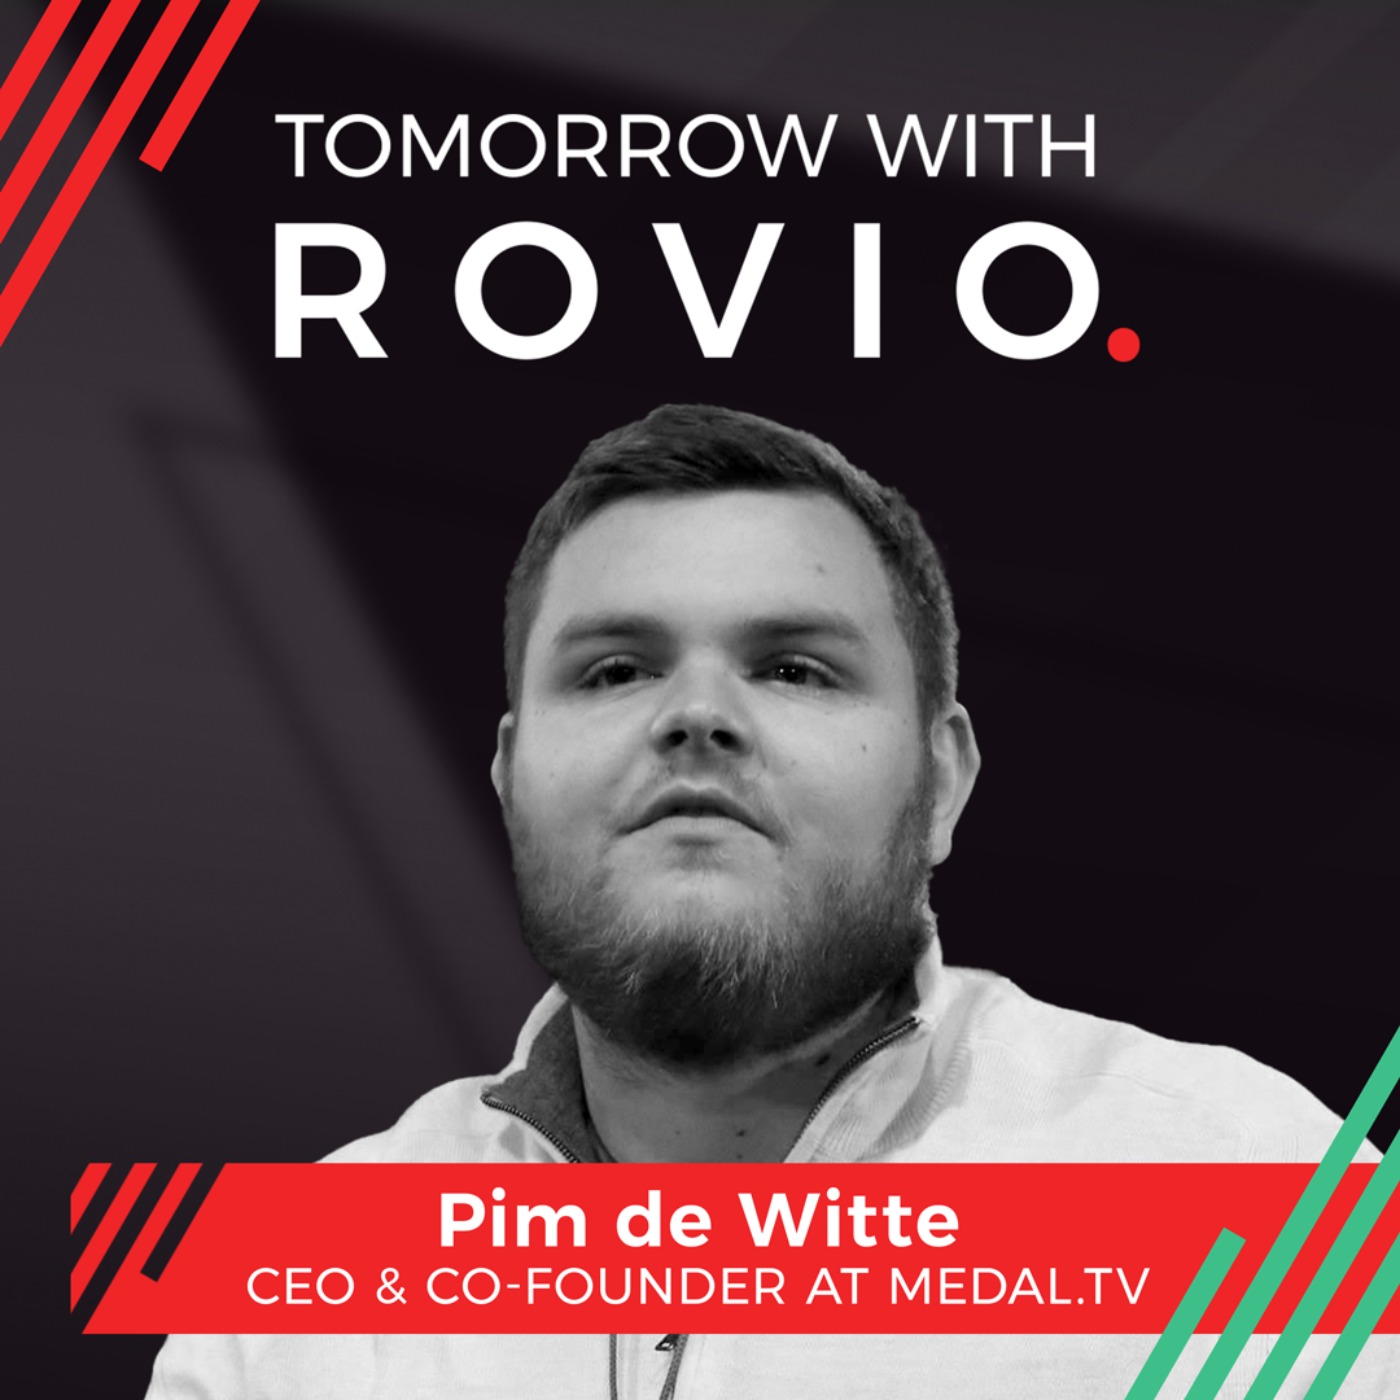 Pim de Witte - CEO and co-founder of Medal.tv